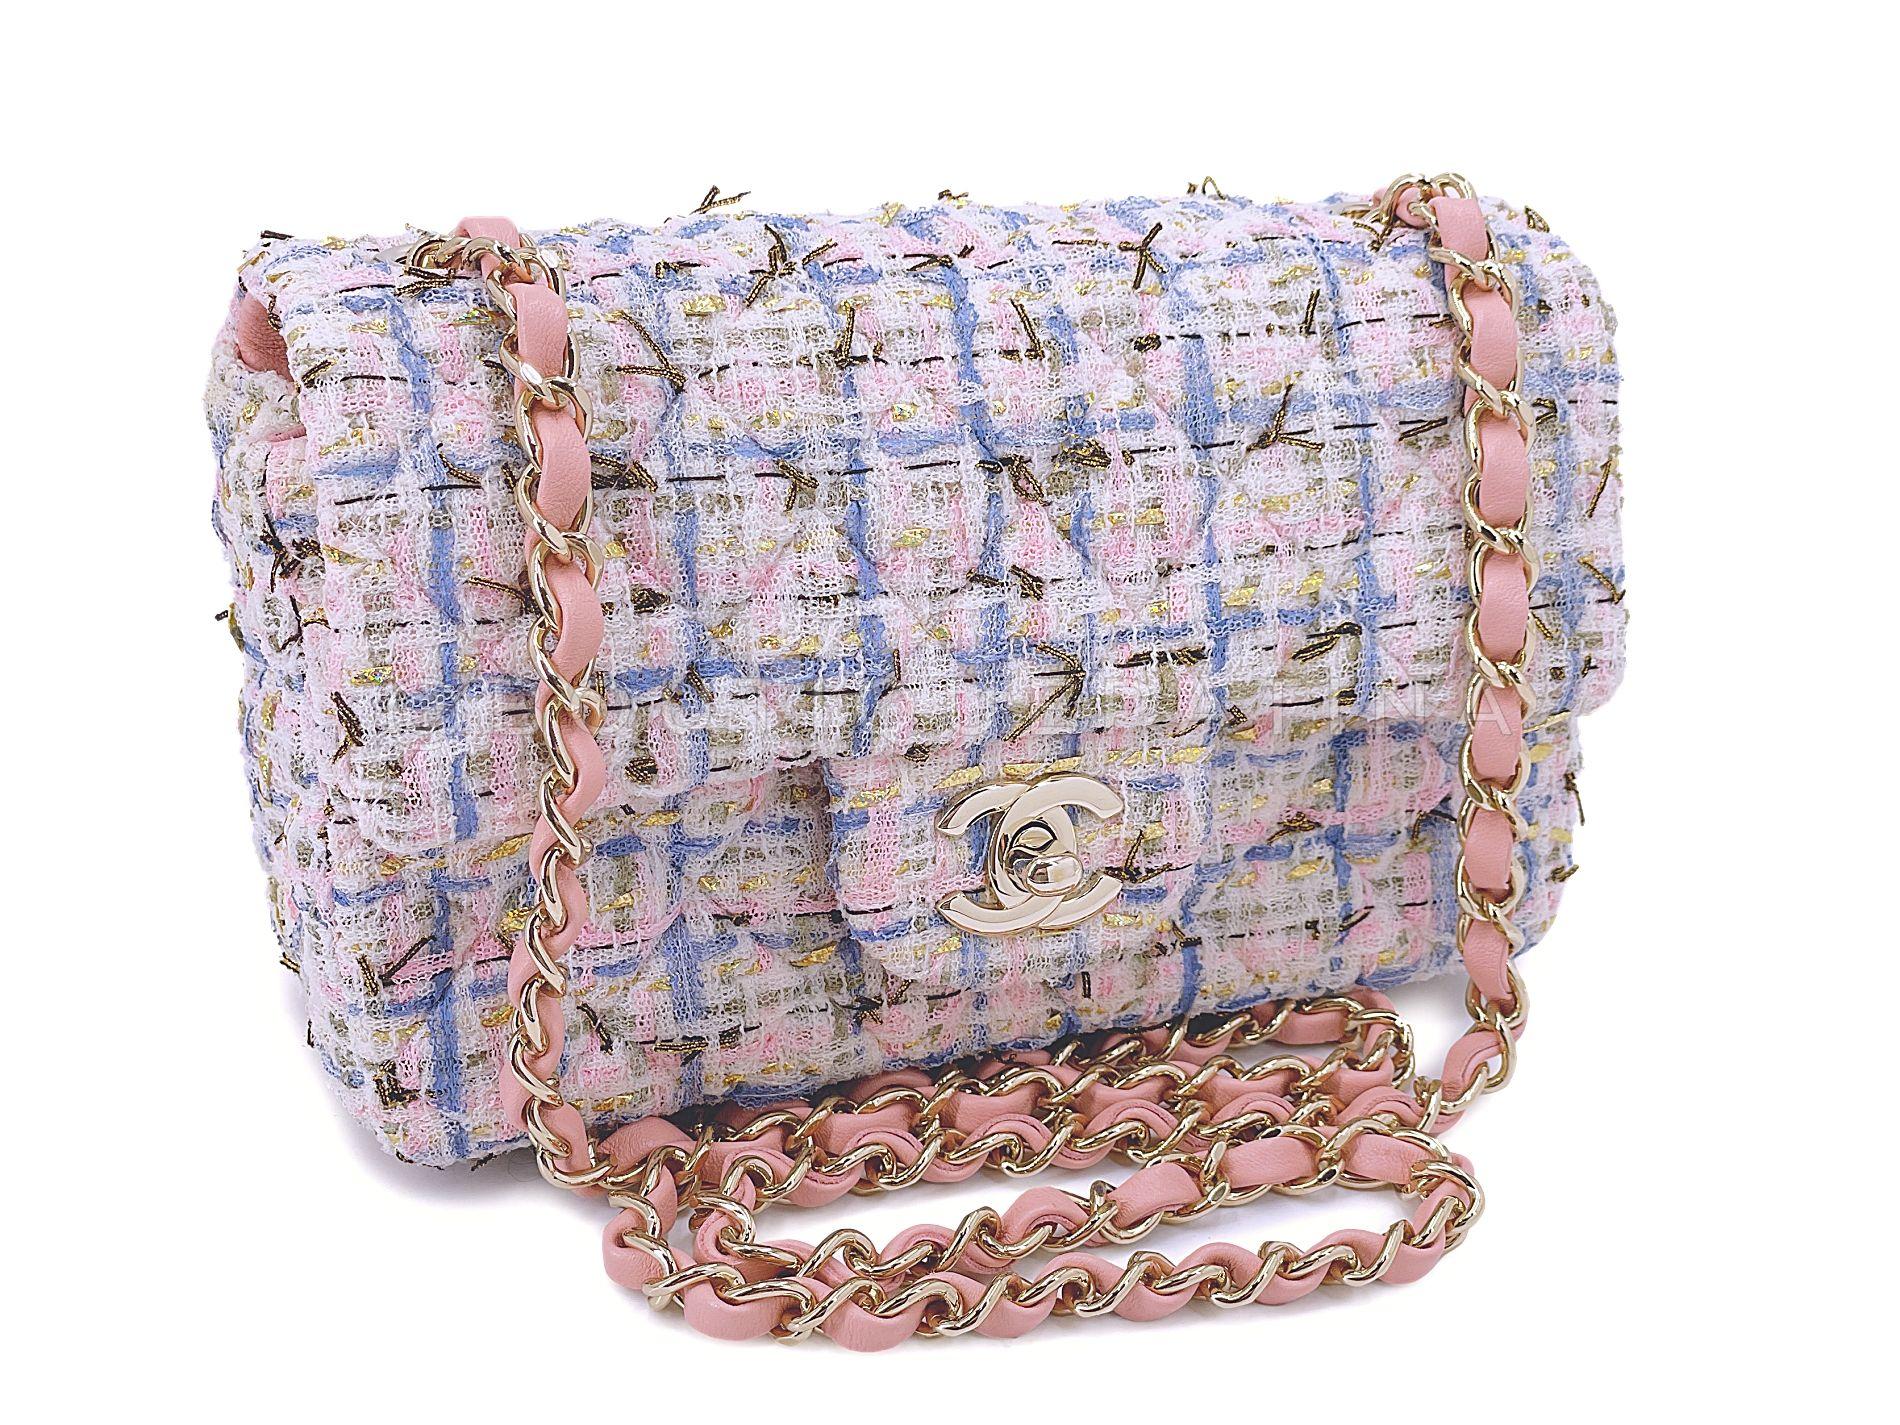 Store item: 68027
This Chanel 19C Pink Tweed Boucle Rectangular Mini Flap Bag GHW is from Karl Lagerfeld's monumental nautical-themed 2019 Resort collection. 

Intricate bright-colored boucle tweed fibers that is so very quintessential Coco Chanel,